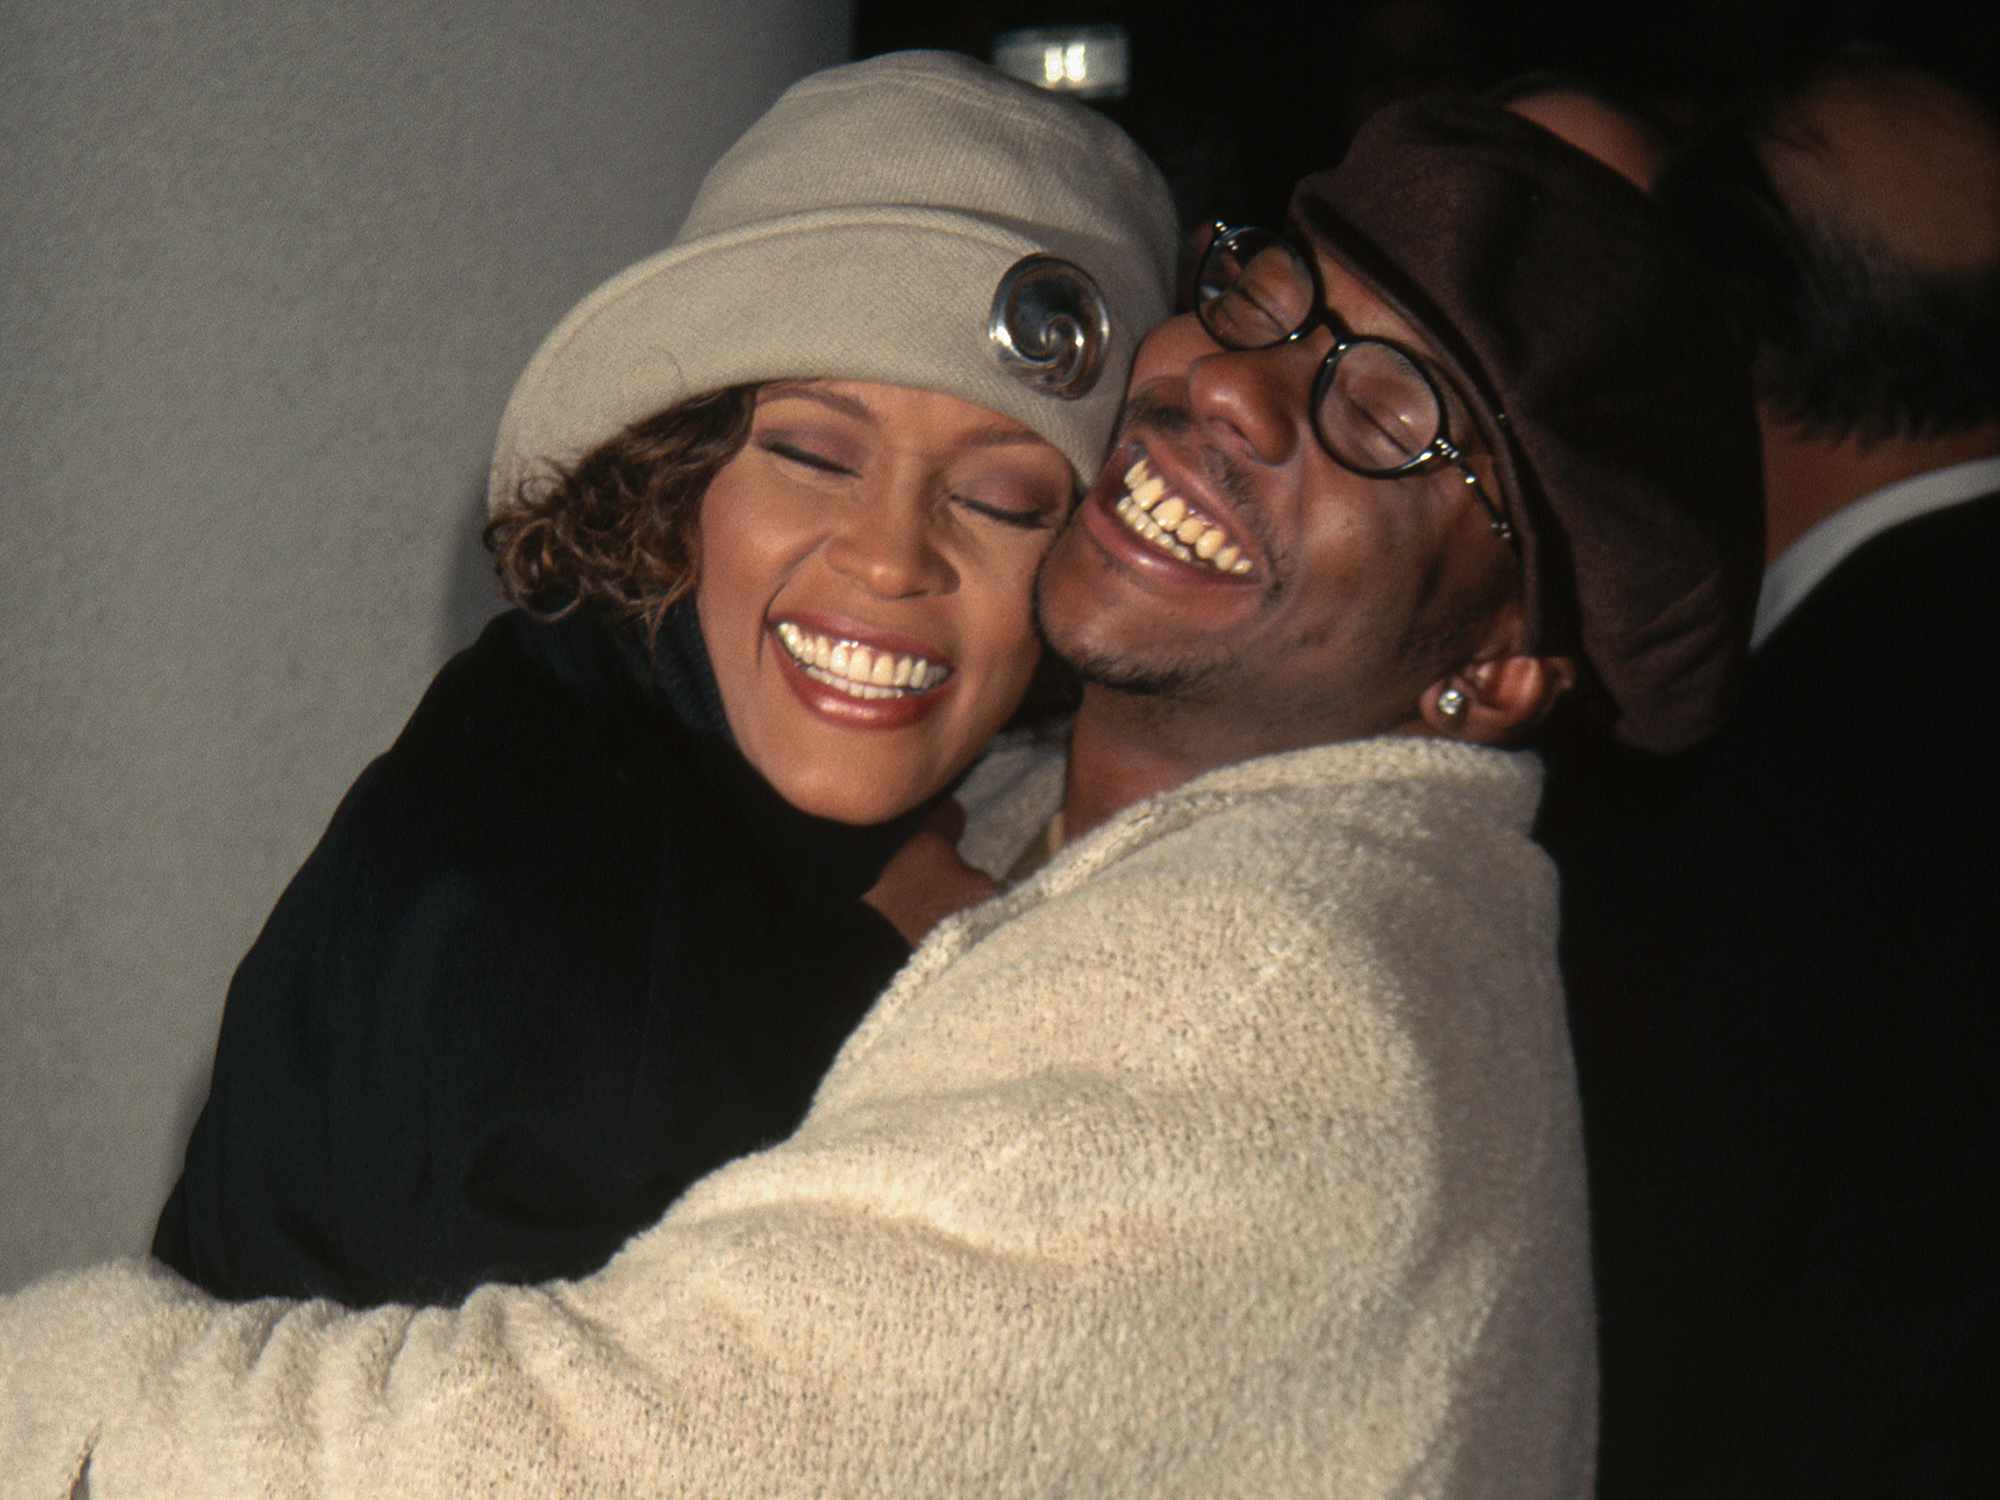 Bobby Brown and Whitney Houston at the premiere of "Cinderella" at Sony Lincoln Square Theater